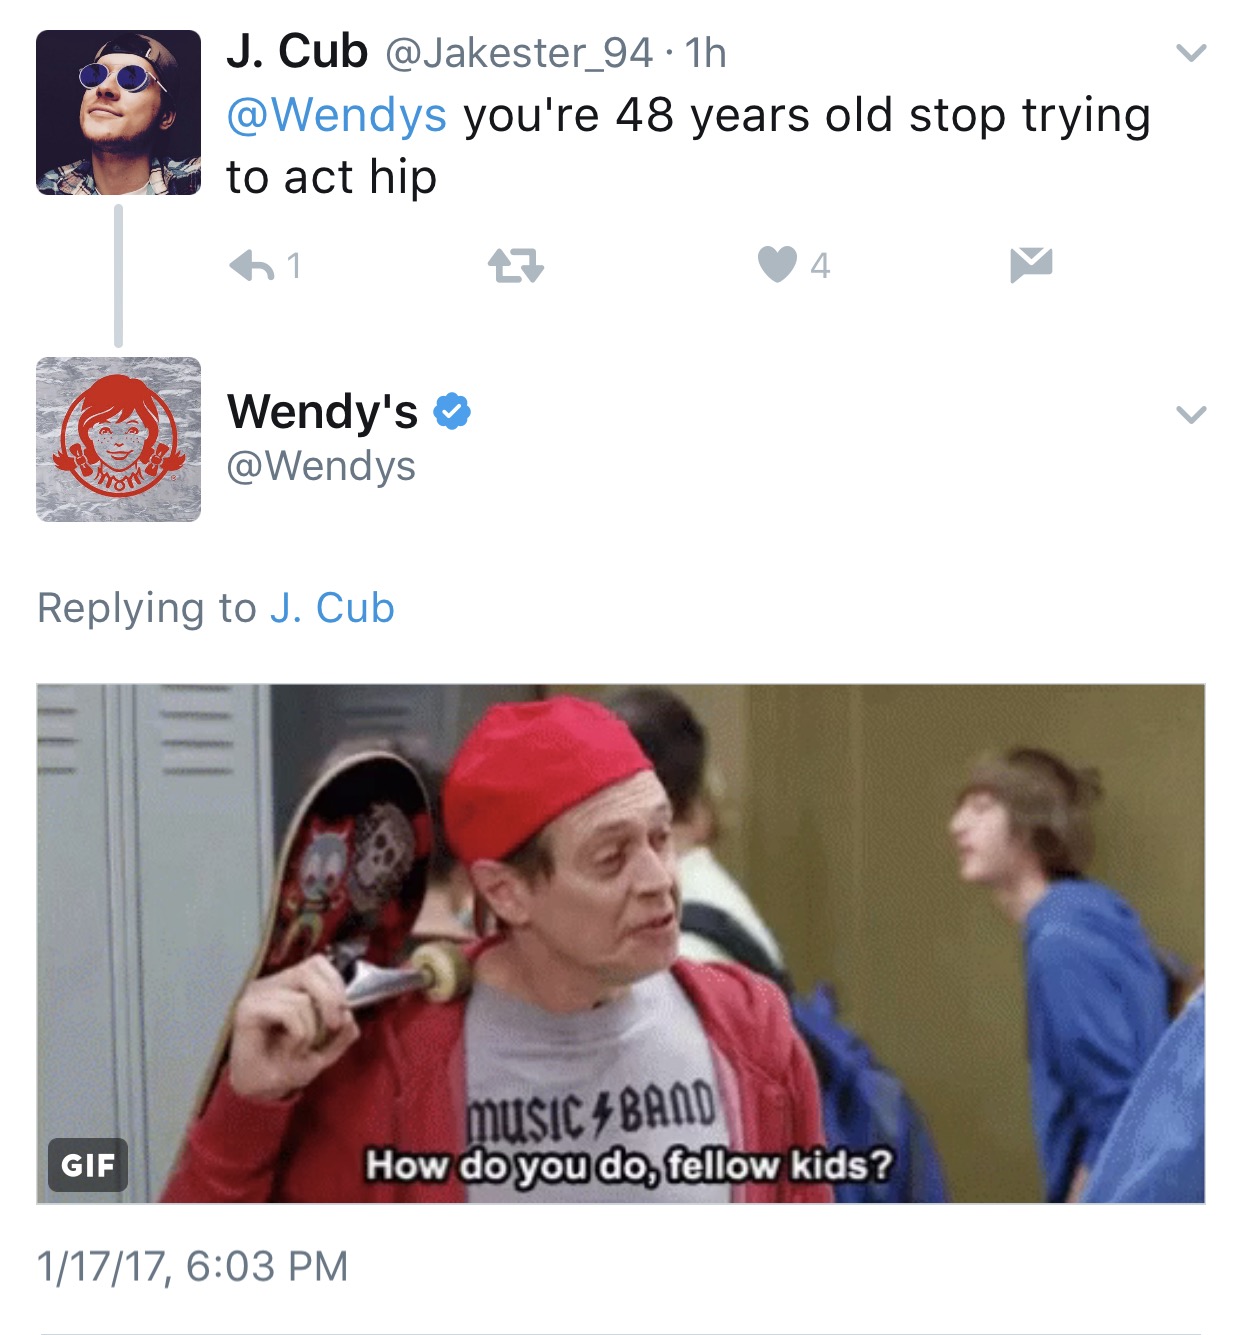 hello fellow kids gif - J. Cub 1h you're 48 years old stop trying to act hip 61 27 4 ~ Wendy's J. Cub music 4 Band How do you do, fellow kids? Gif 11717,